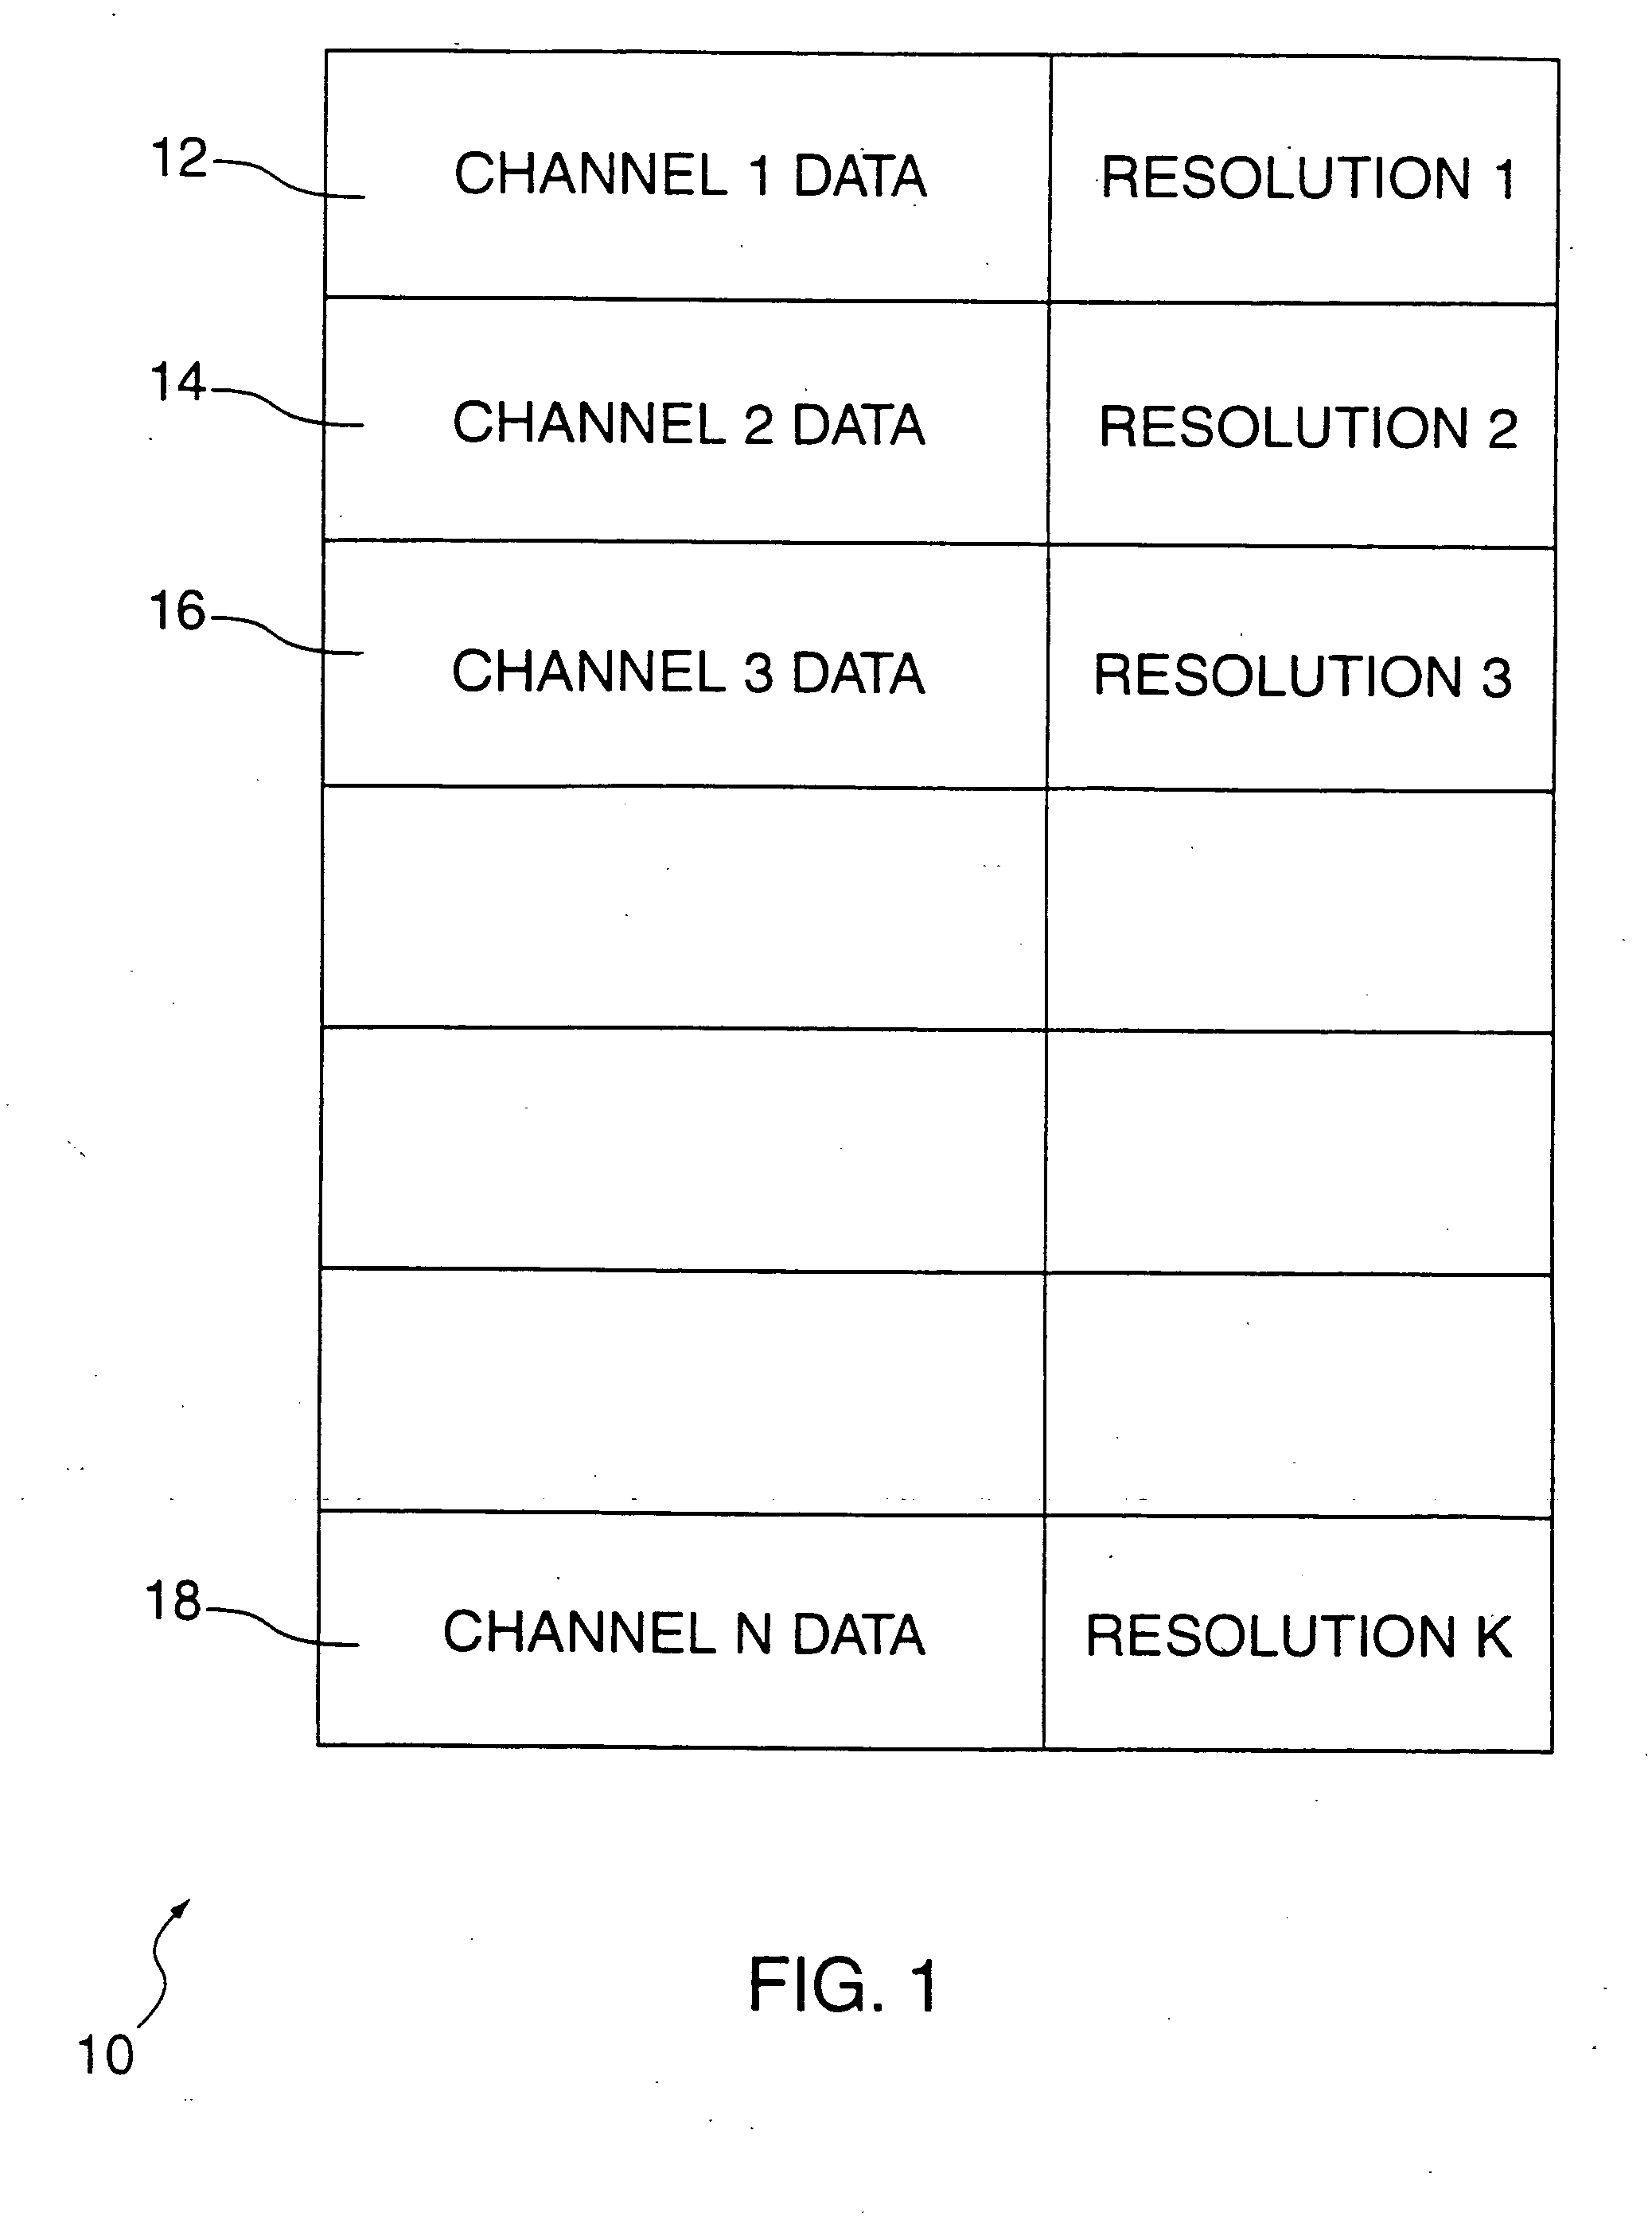 Recording and playback of multi-channel digital audio having different resolutions for different channels